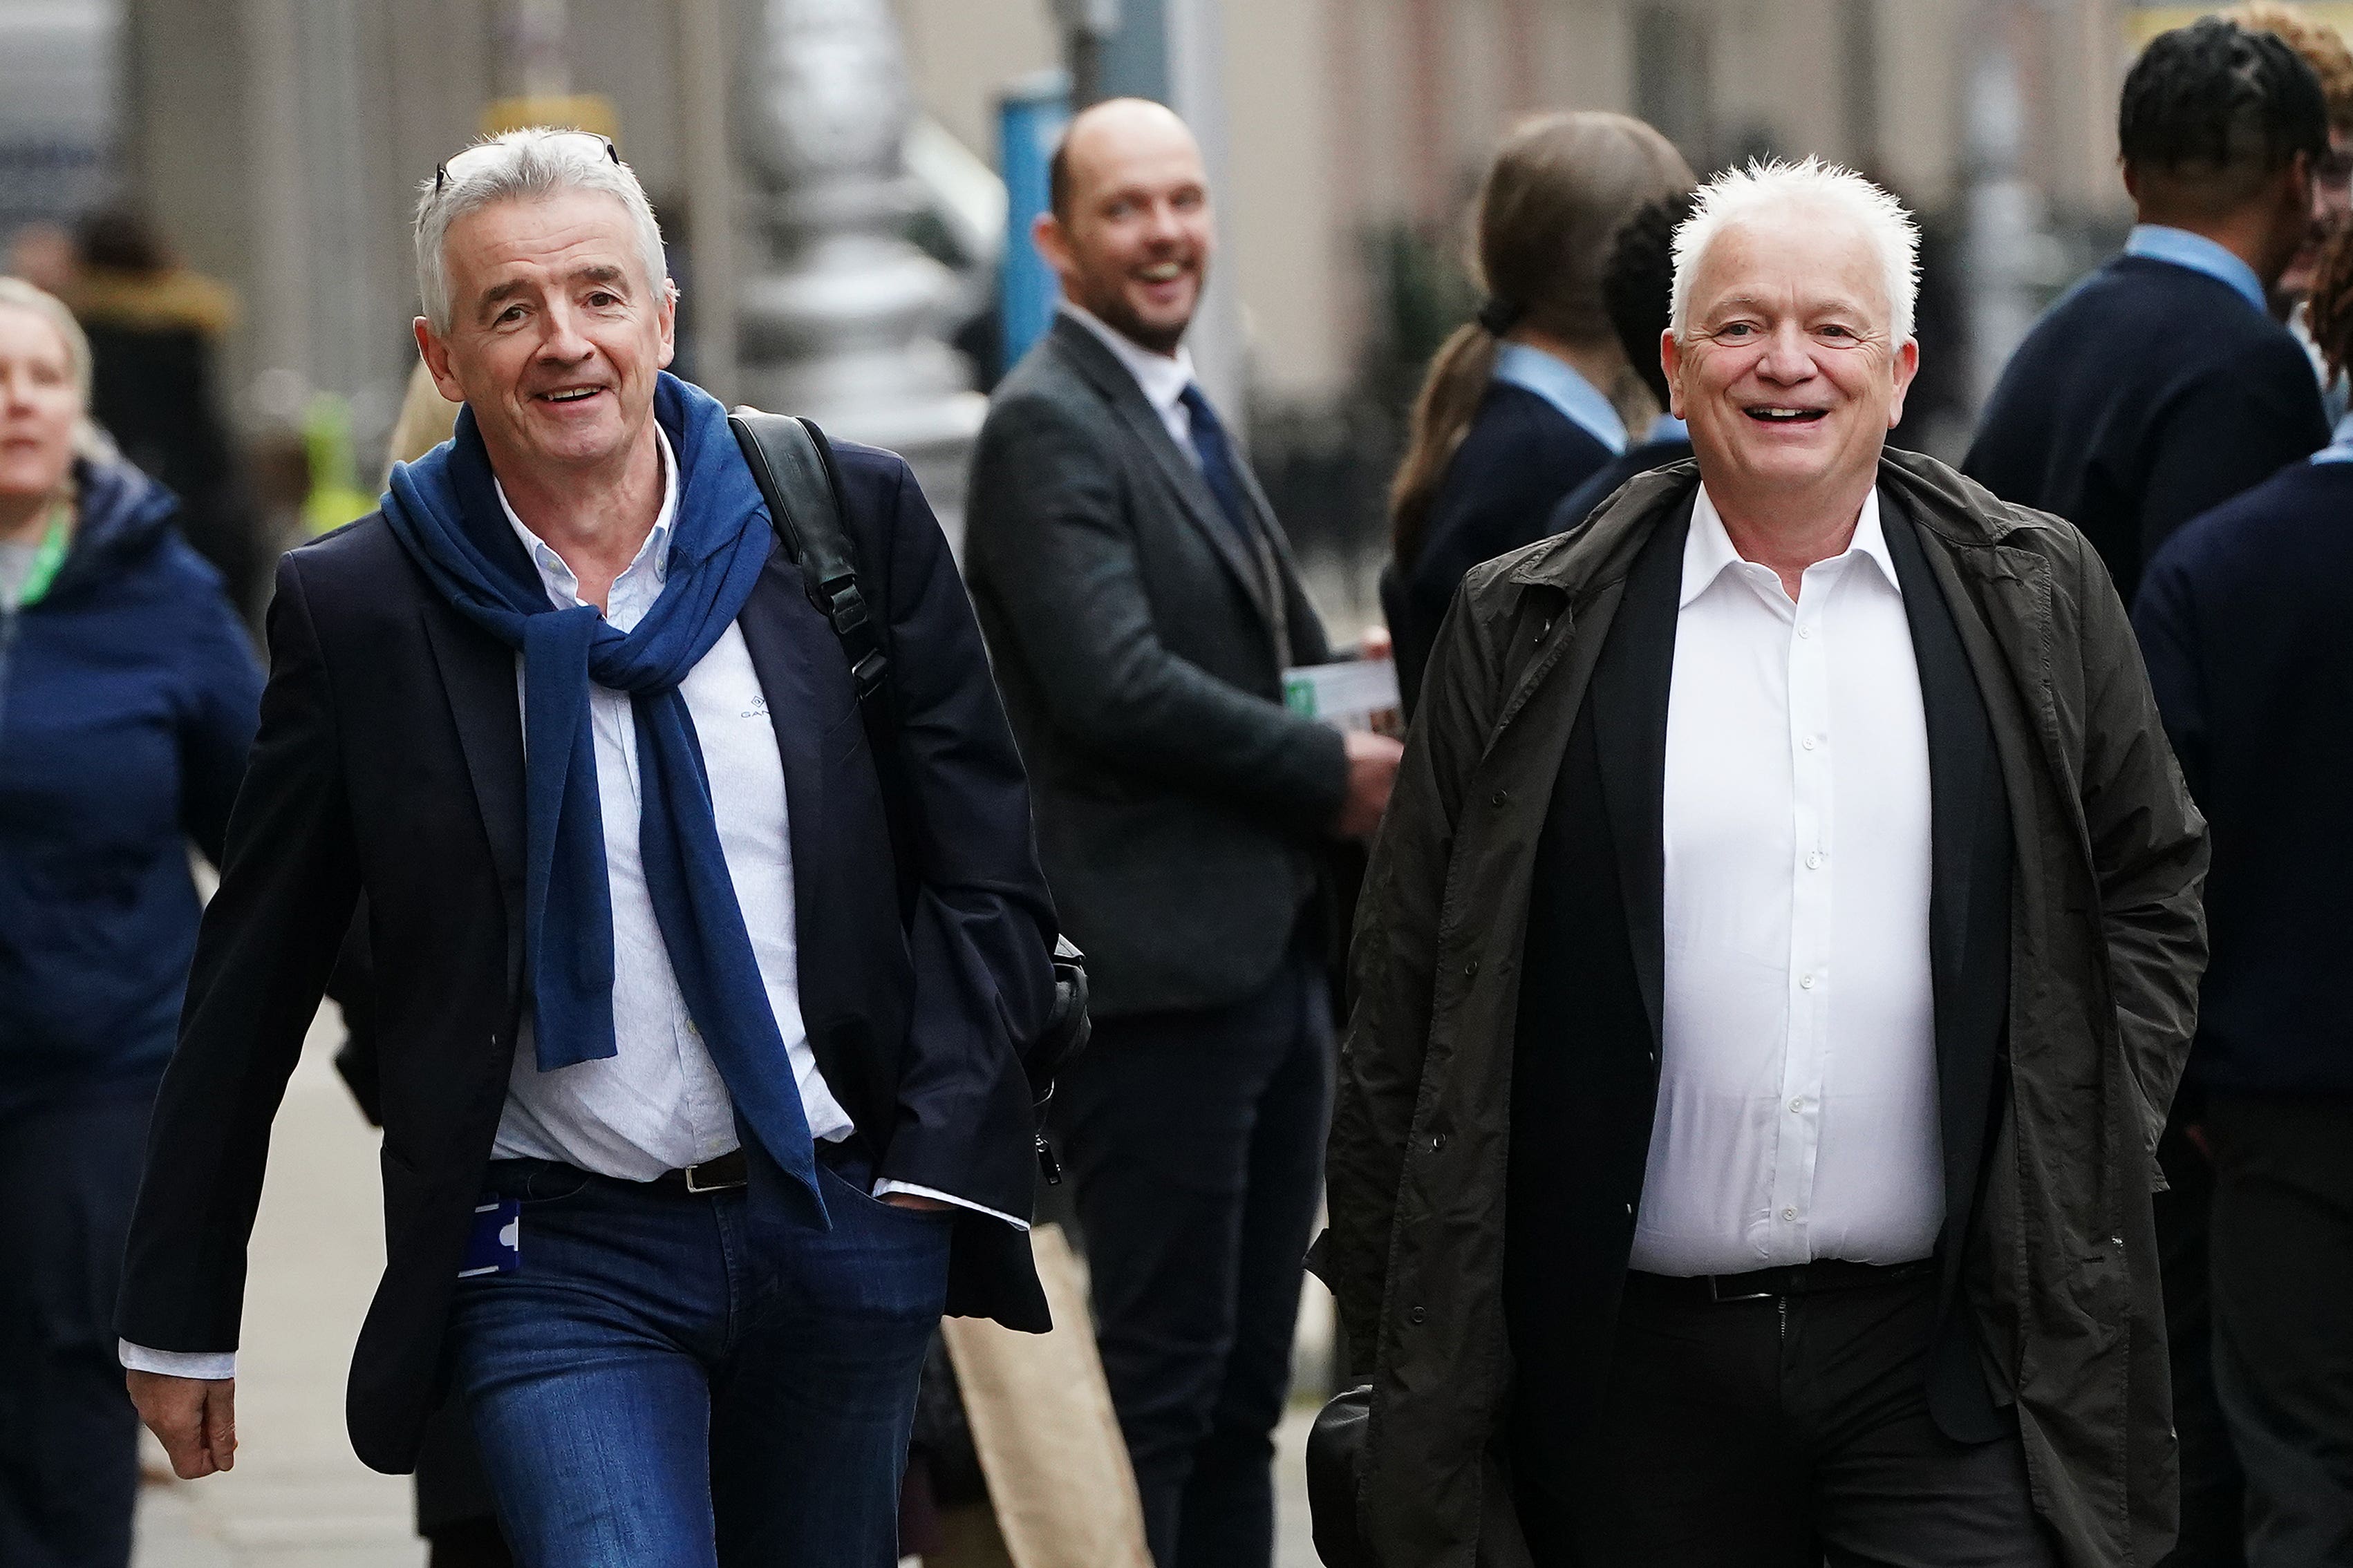 Ryanair chief executive Michael O’Leary (left) and Ryanair DAC CEO Eddie Wilson arriving at Leinster House, Dublin, to appear before the transport committee to address it on Ireland�s national aviation policy. Picture date: Wednesday November 30, 2022.